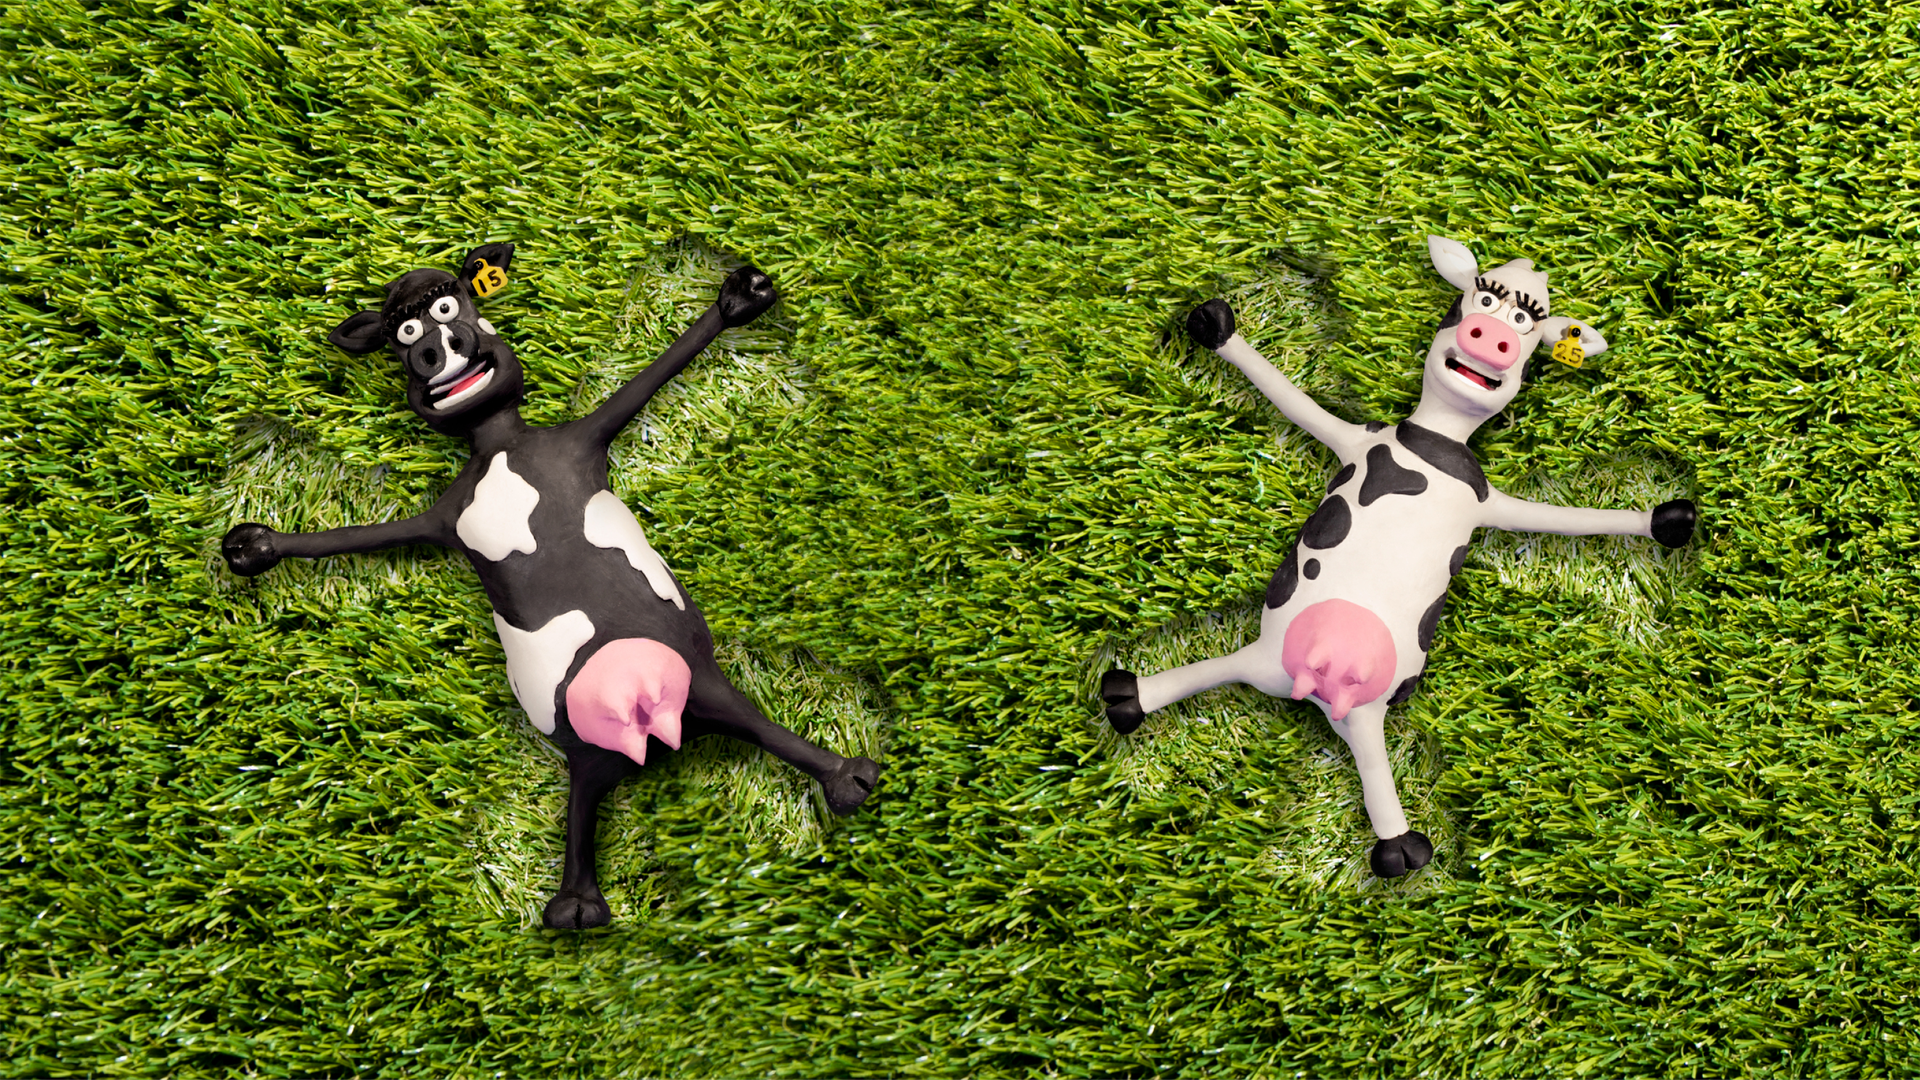 RAGT NZ cow characters making angels in grass